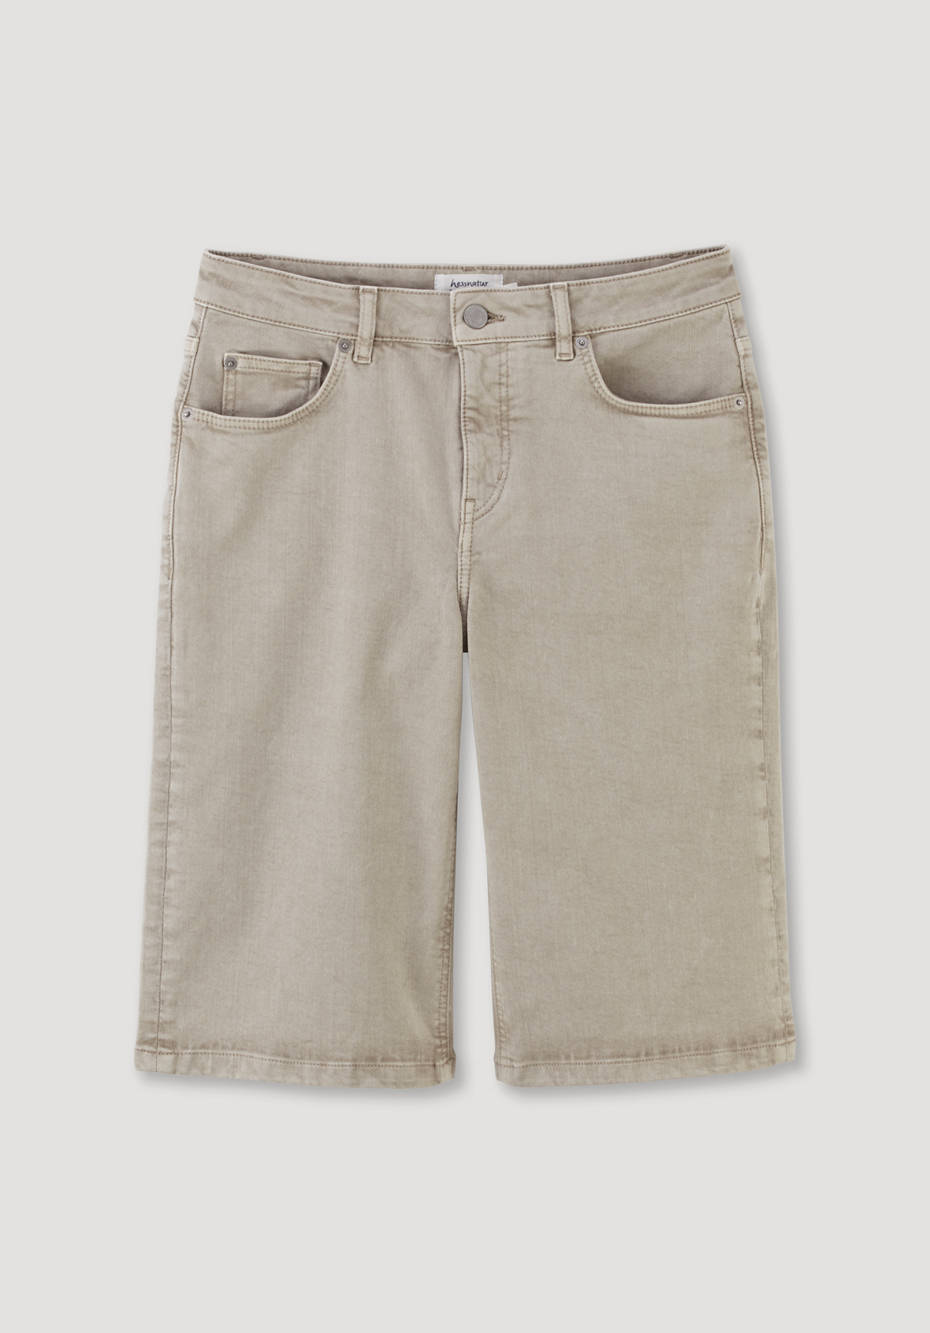 Limited by Nature shorts mineral-dyed in organic denim